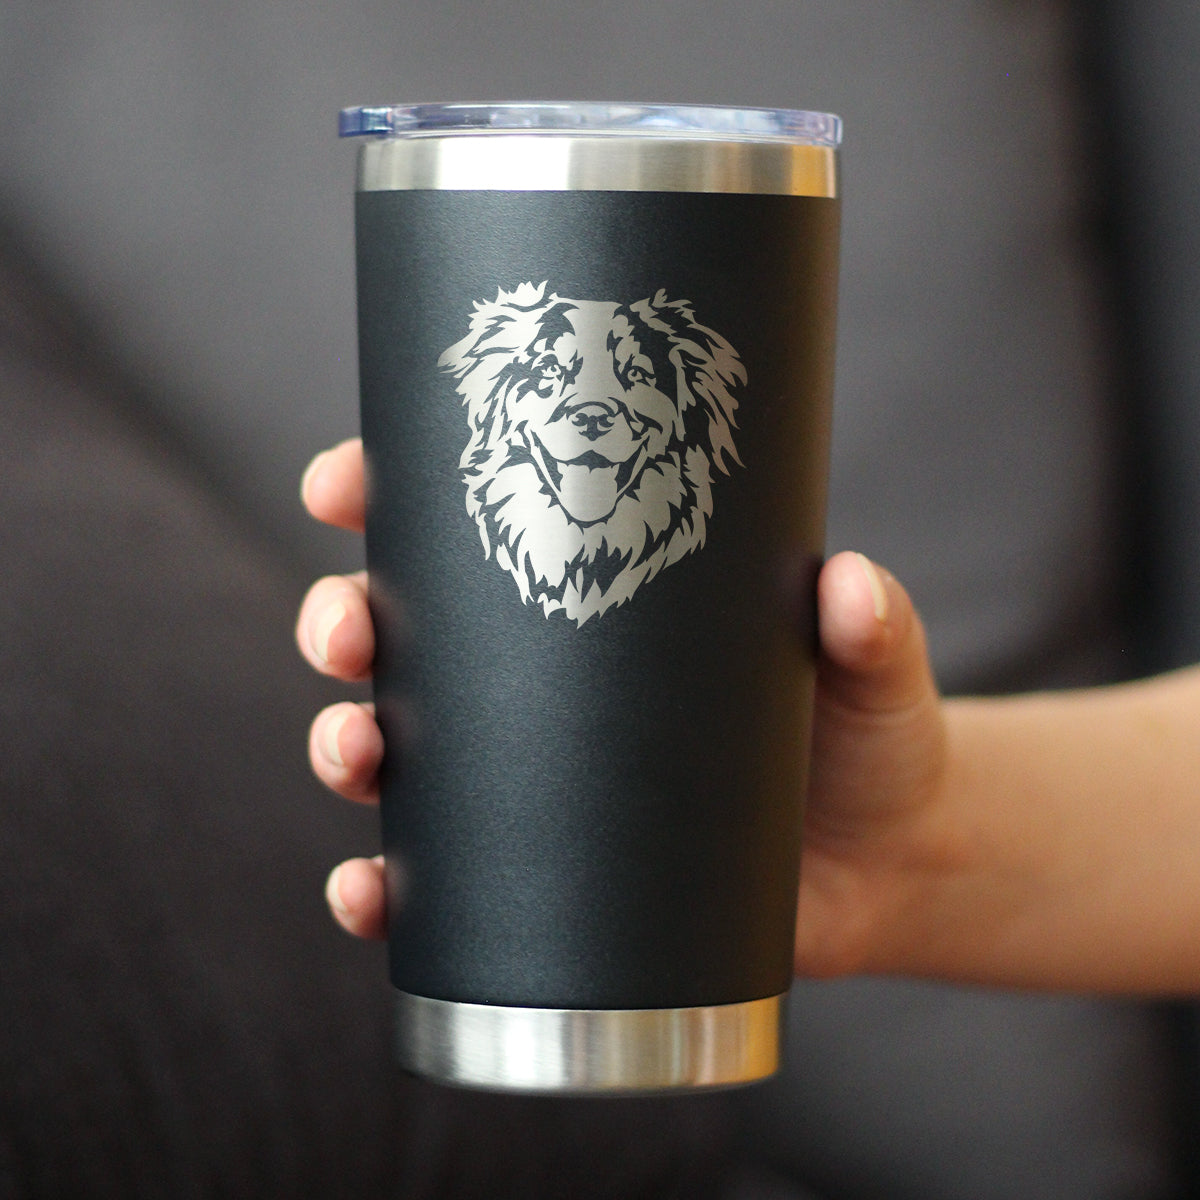 Australian Shepherd Face - Insulated Coffee Tumbler Cup with Sliding Lid - Stainless Steel Travel Mug - Unique Dog Gifts for Aussie Lovers